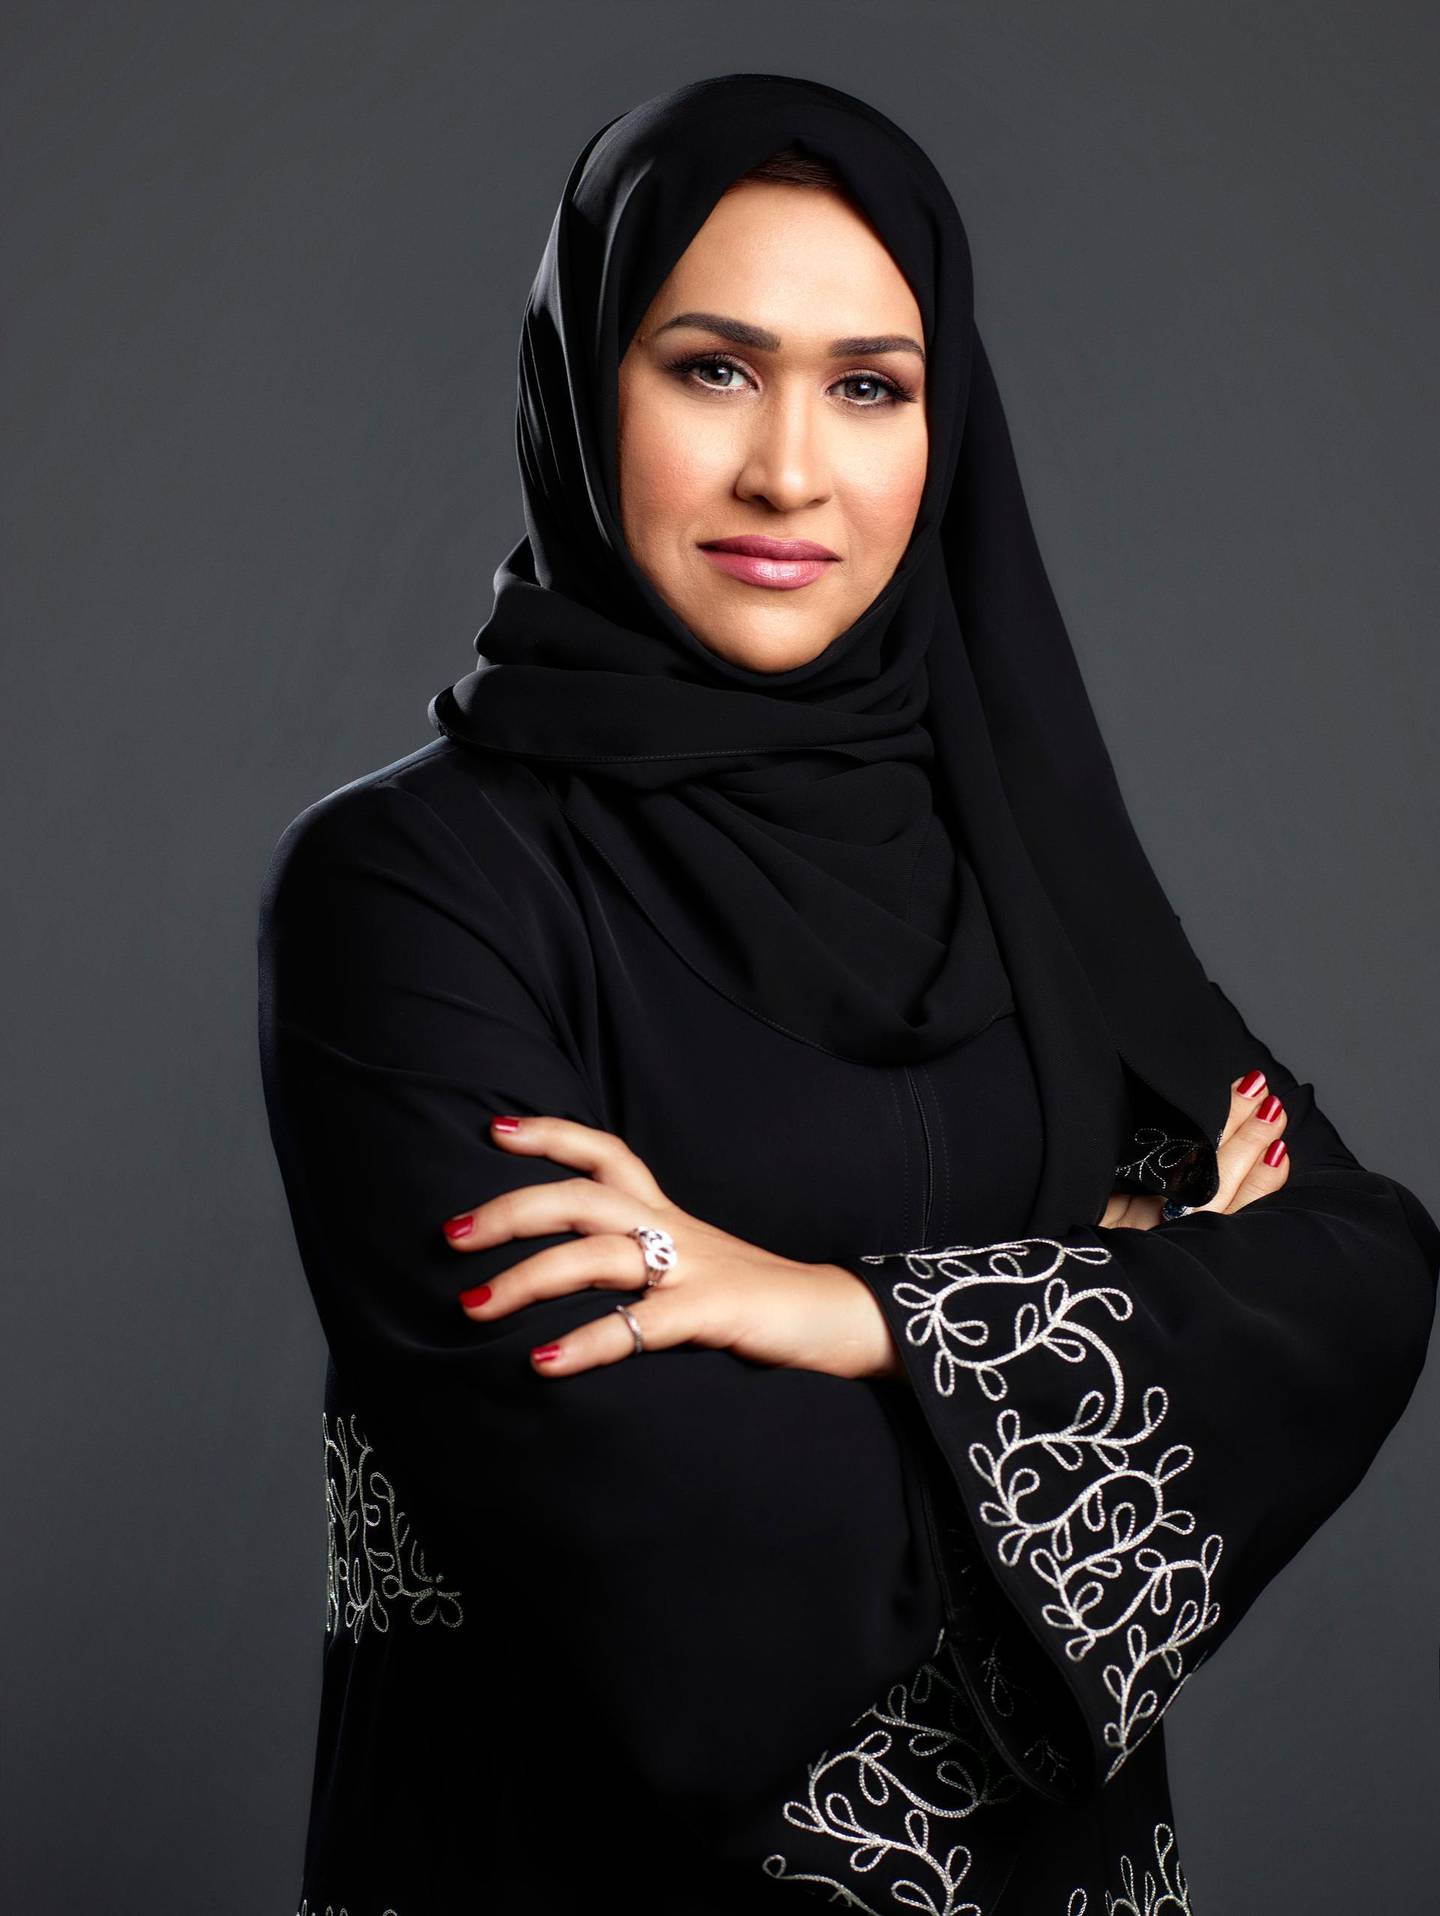 Fatma Taher is the first UAE national to graduate with a PhD in engineering